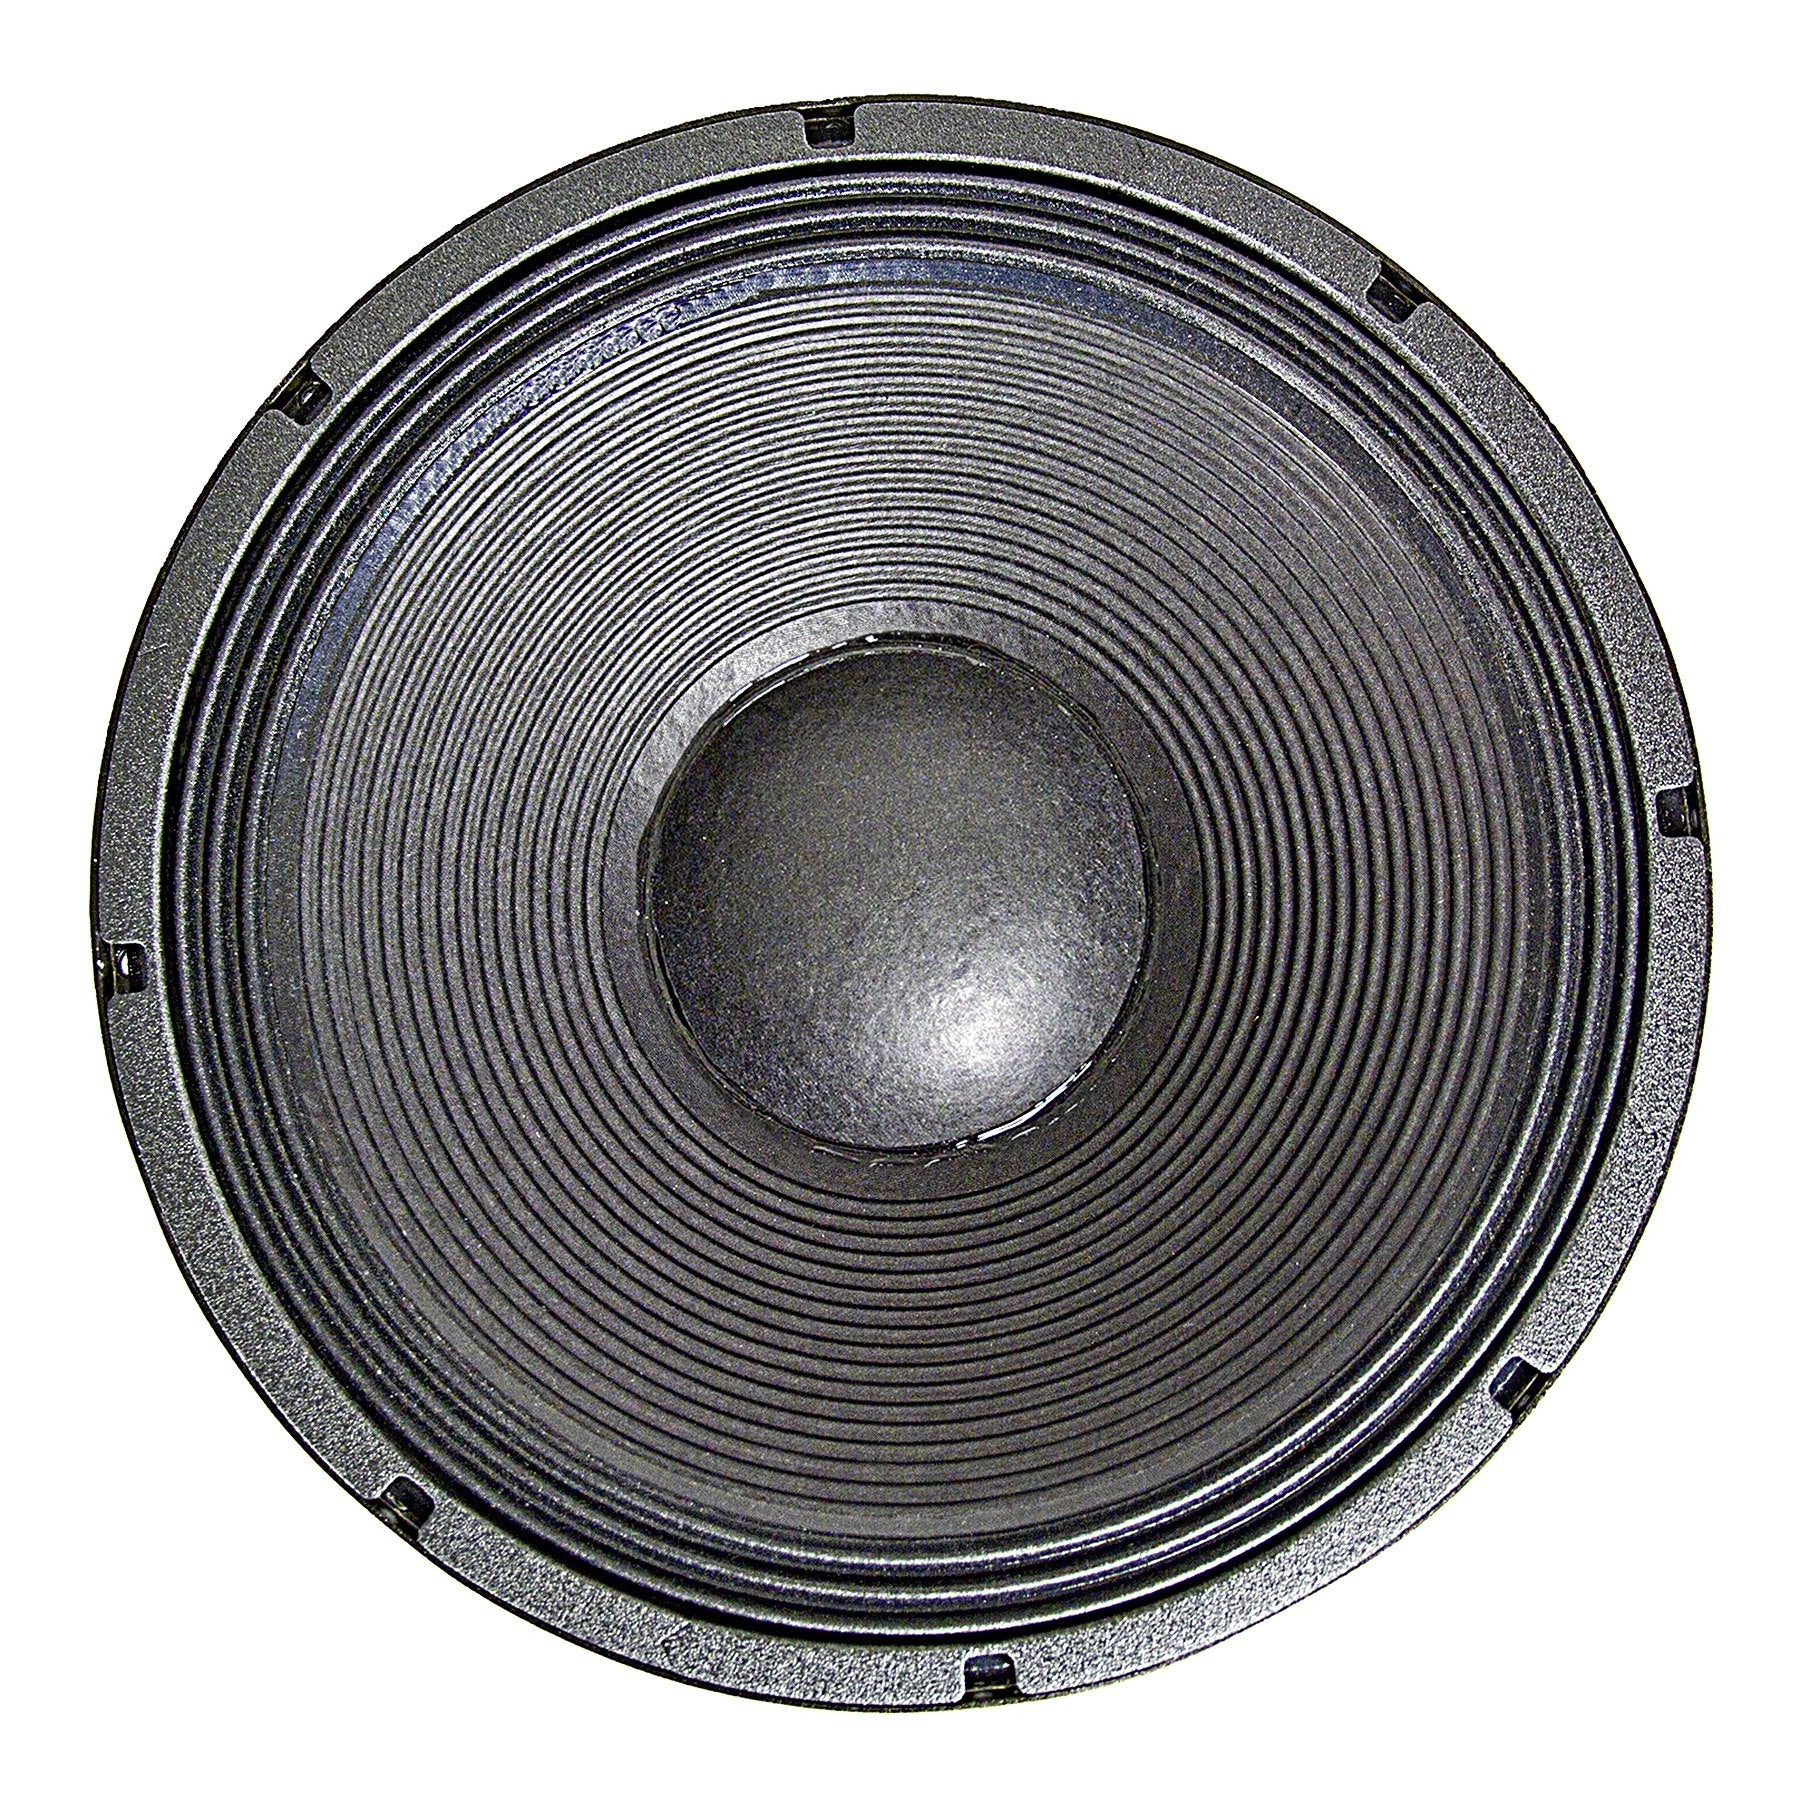 NSW6021_6 21" Subwoofer